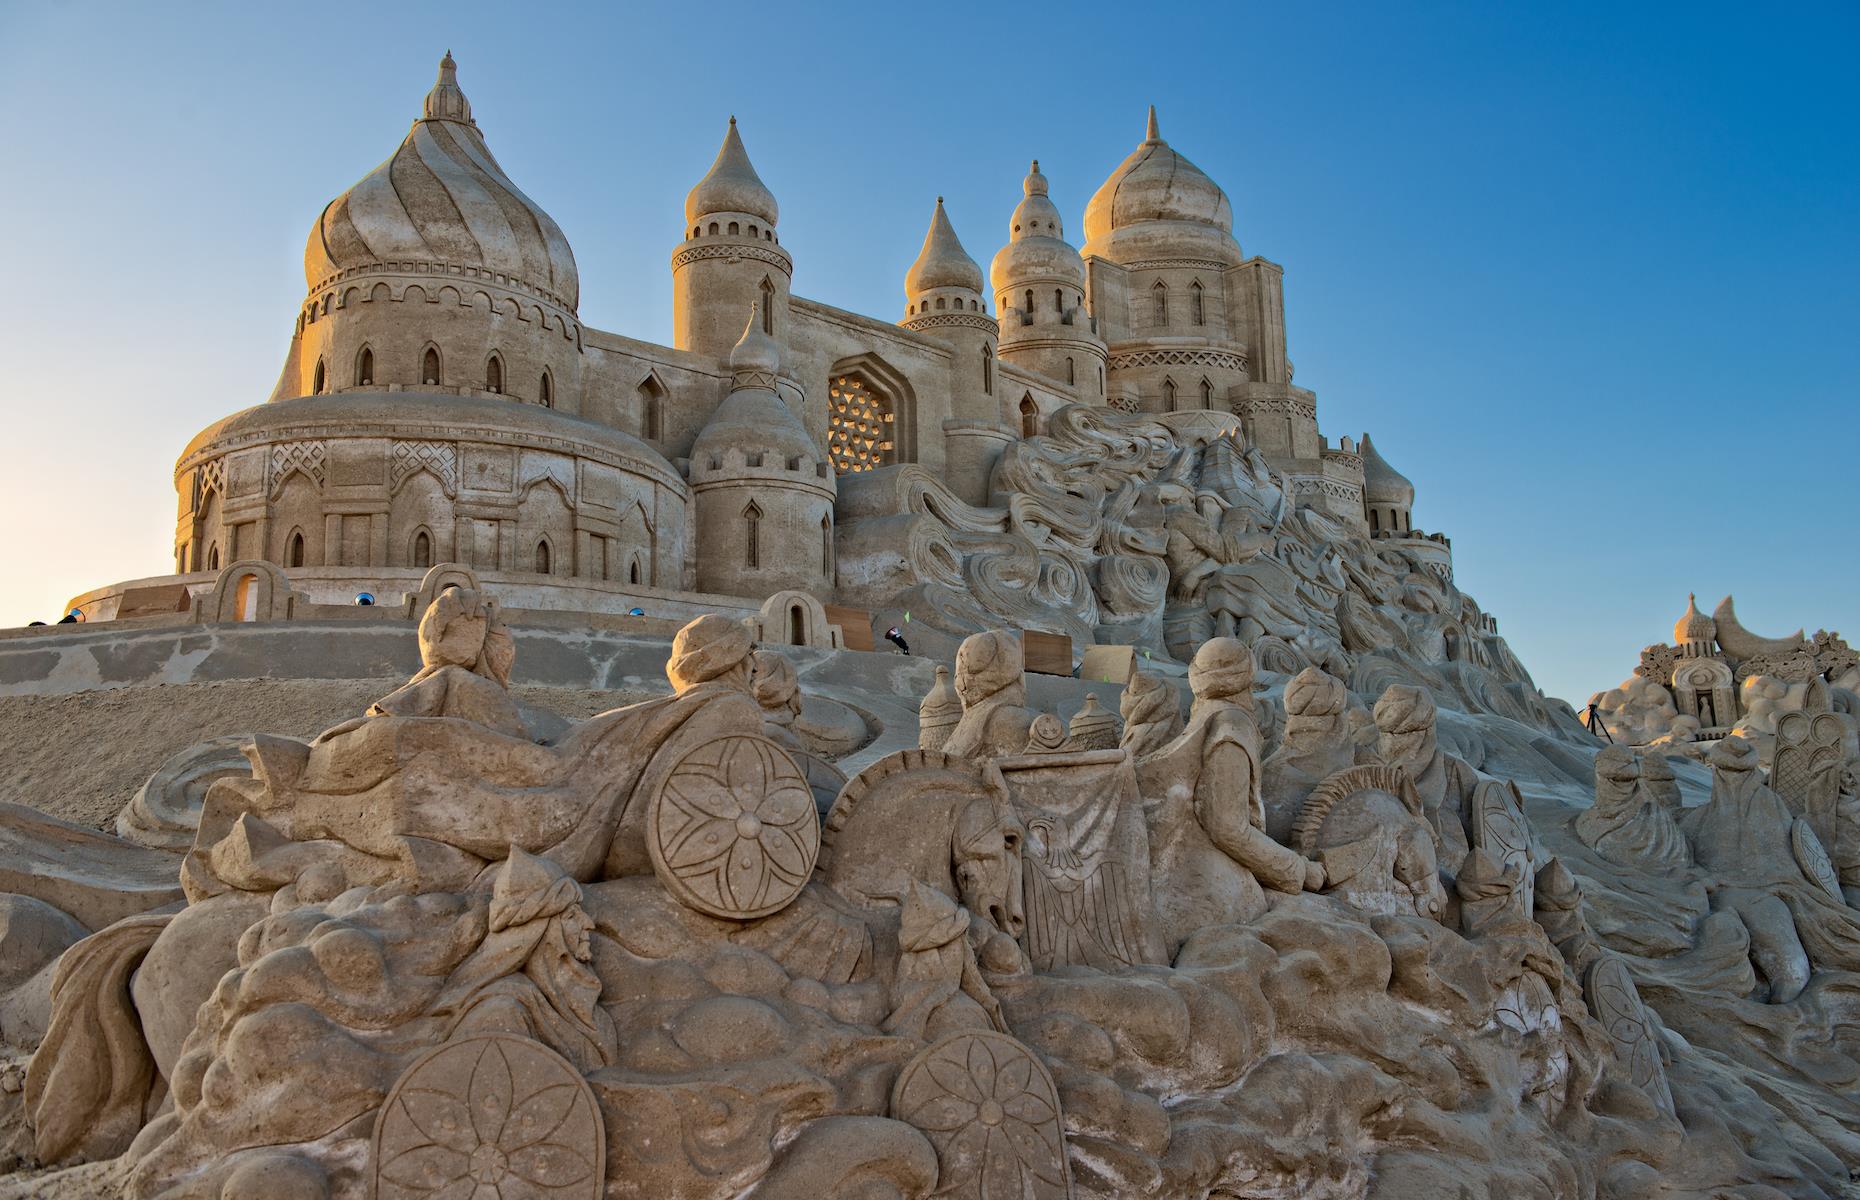 <p>Inspired by the Middle Eastern folktale collection, <em>One Thousand and One Nights</em>, this epic sand “village” was on display at the Remal International Festival in Kuwait in 2014. The magical world reportedly covered an area of 322,917 square feet (30,000sqm) and used more than 31,000 tons of sand. As well as grand domed palaces, minarets and traditional little villages, the sprawling artwork included fearsome snakes, a giant genie and gruesome skeletons. Lit up at night, it was even more enchanting.</p>  <p><strong><a href="http://bit.ly/3roL4wv">Love this? Follow our Facebook page for more travel inspiration</a></strong></p>